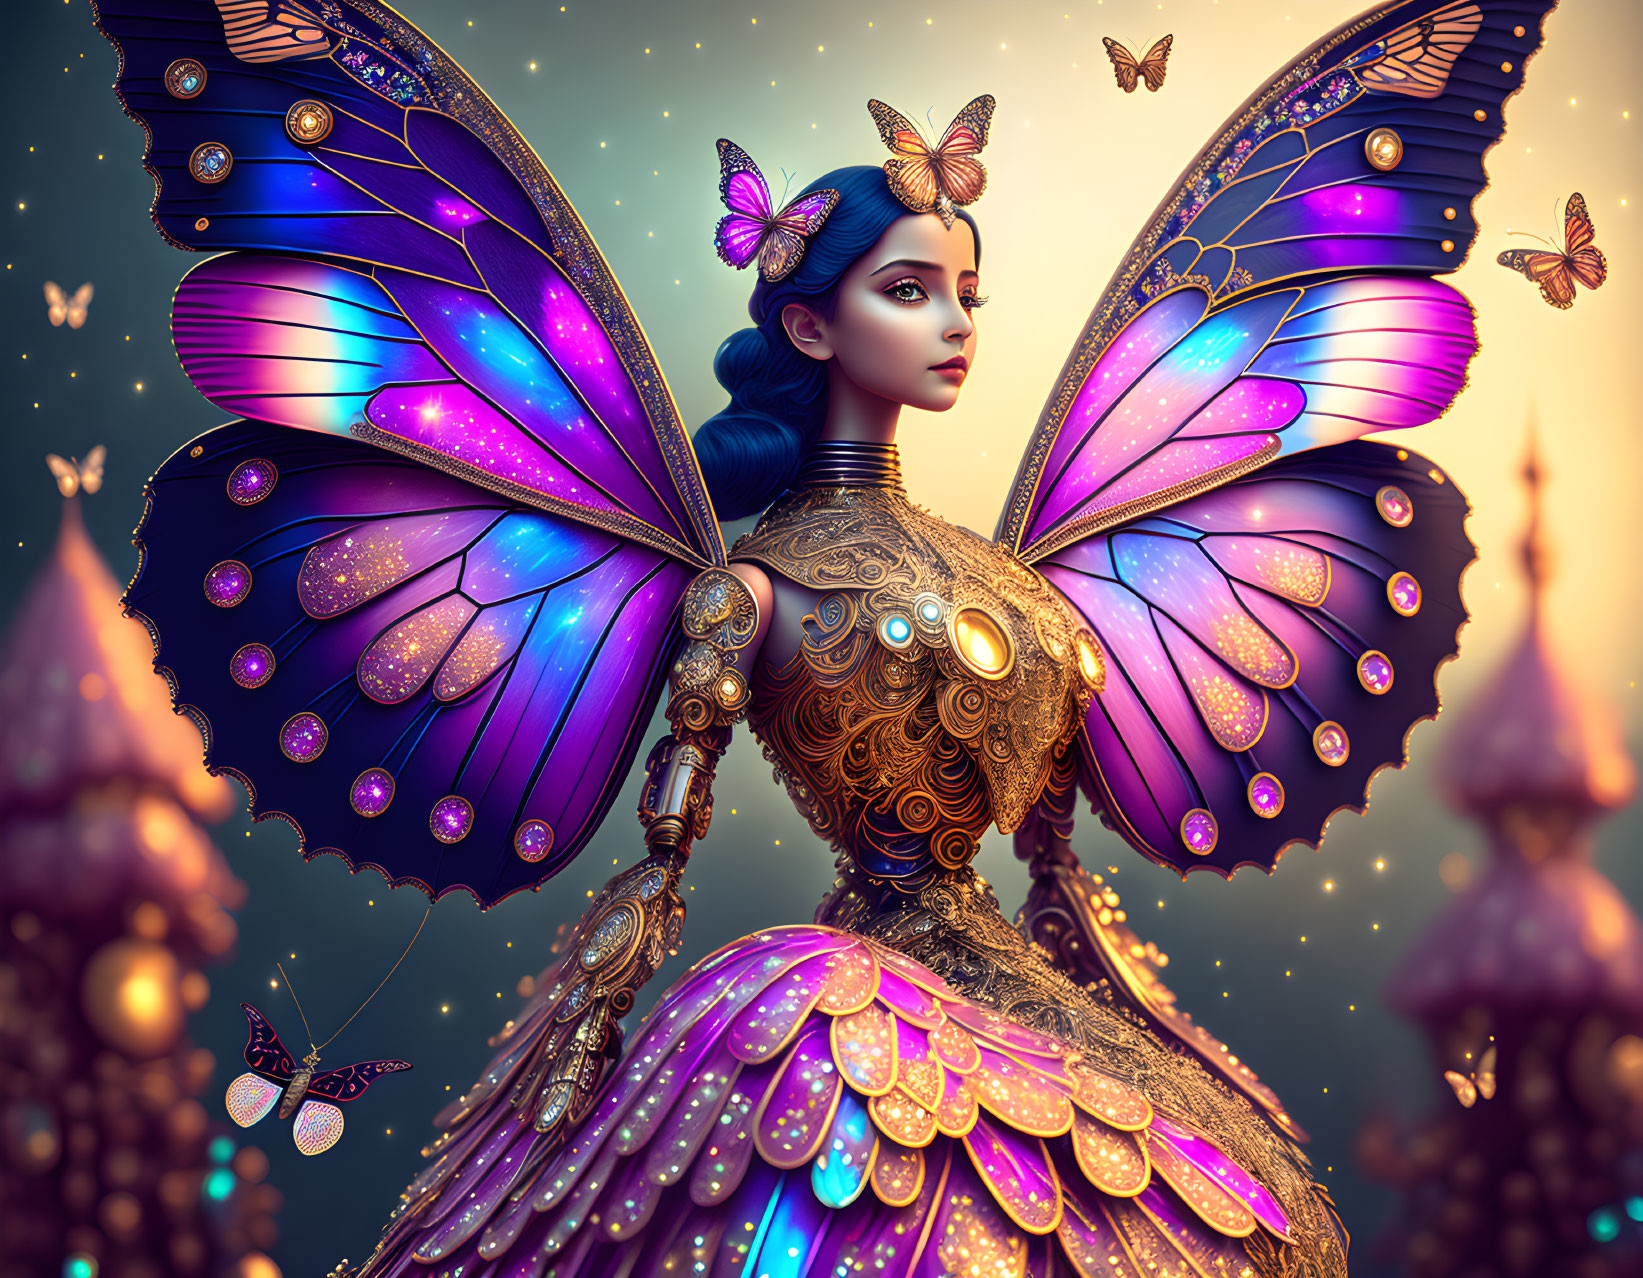 Digital art: Woman with mechanical butterfly wings in fantasy setting